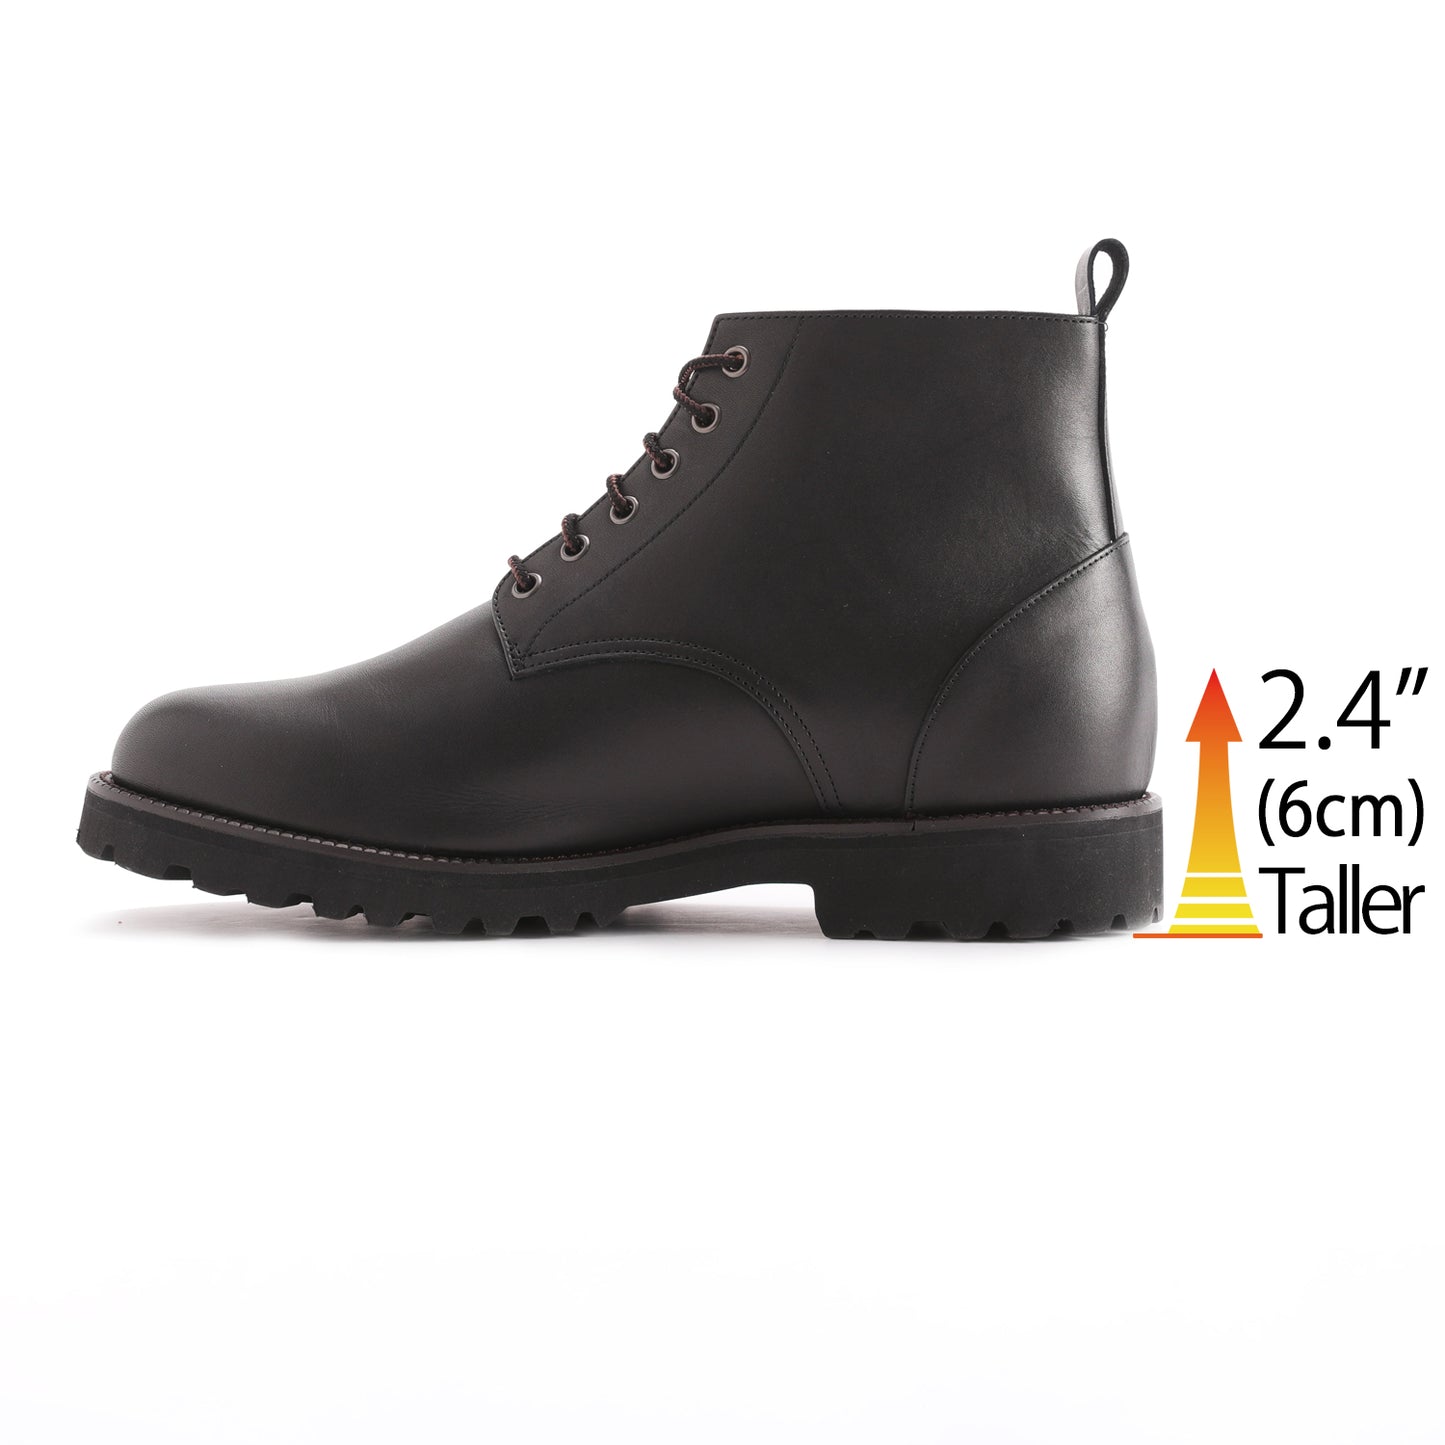 Men's Elevator Shoes Height Increasing 2.36" Taller Plain Toe Lace Up Work Boots Genuine Leather No. 1573